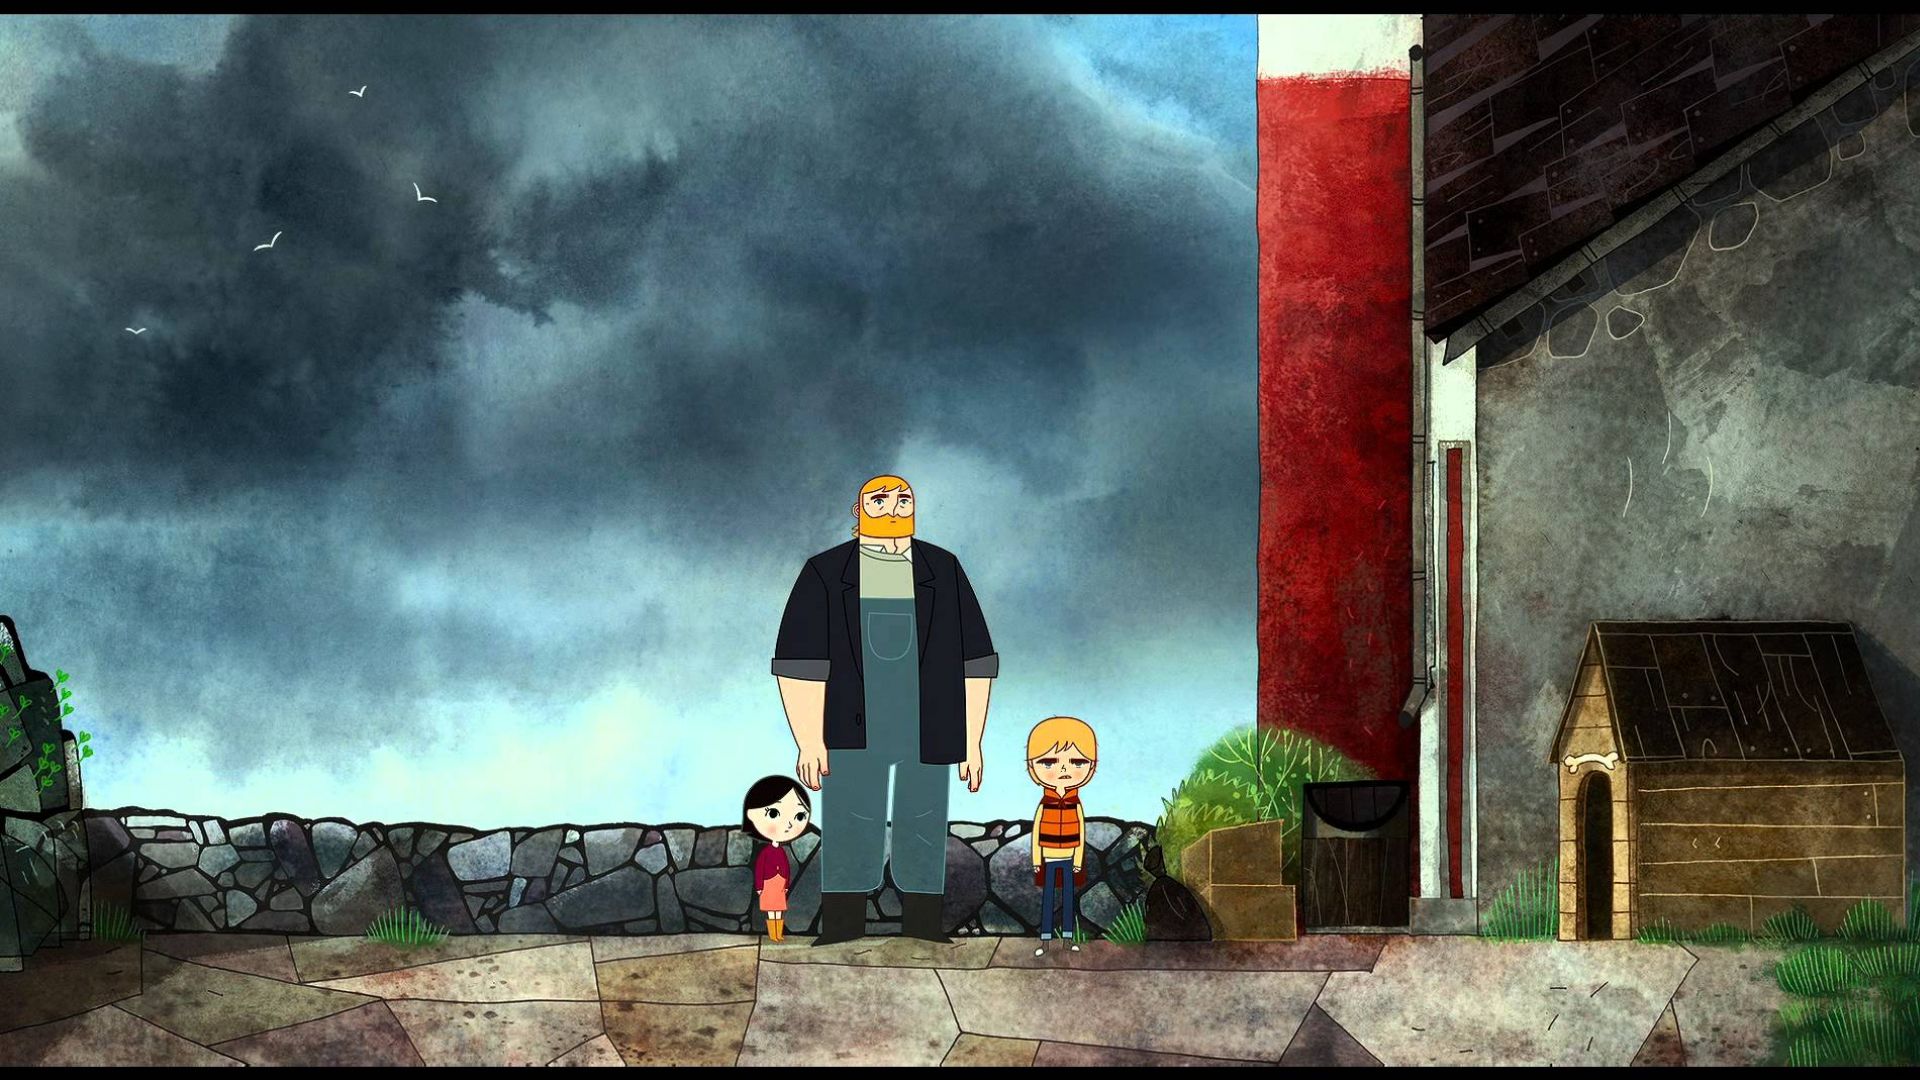 New Trailer for the Beautiful Acclaimed Animation 'Song of t